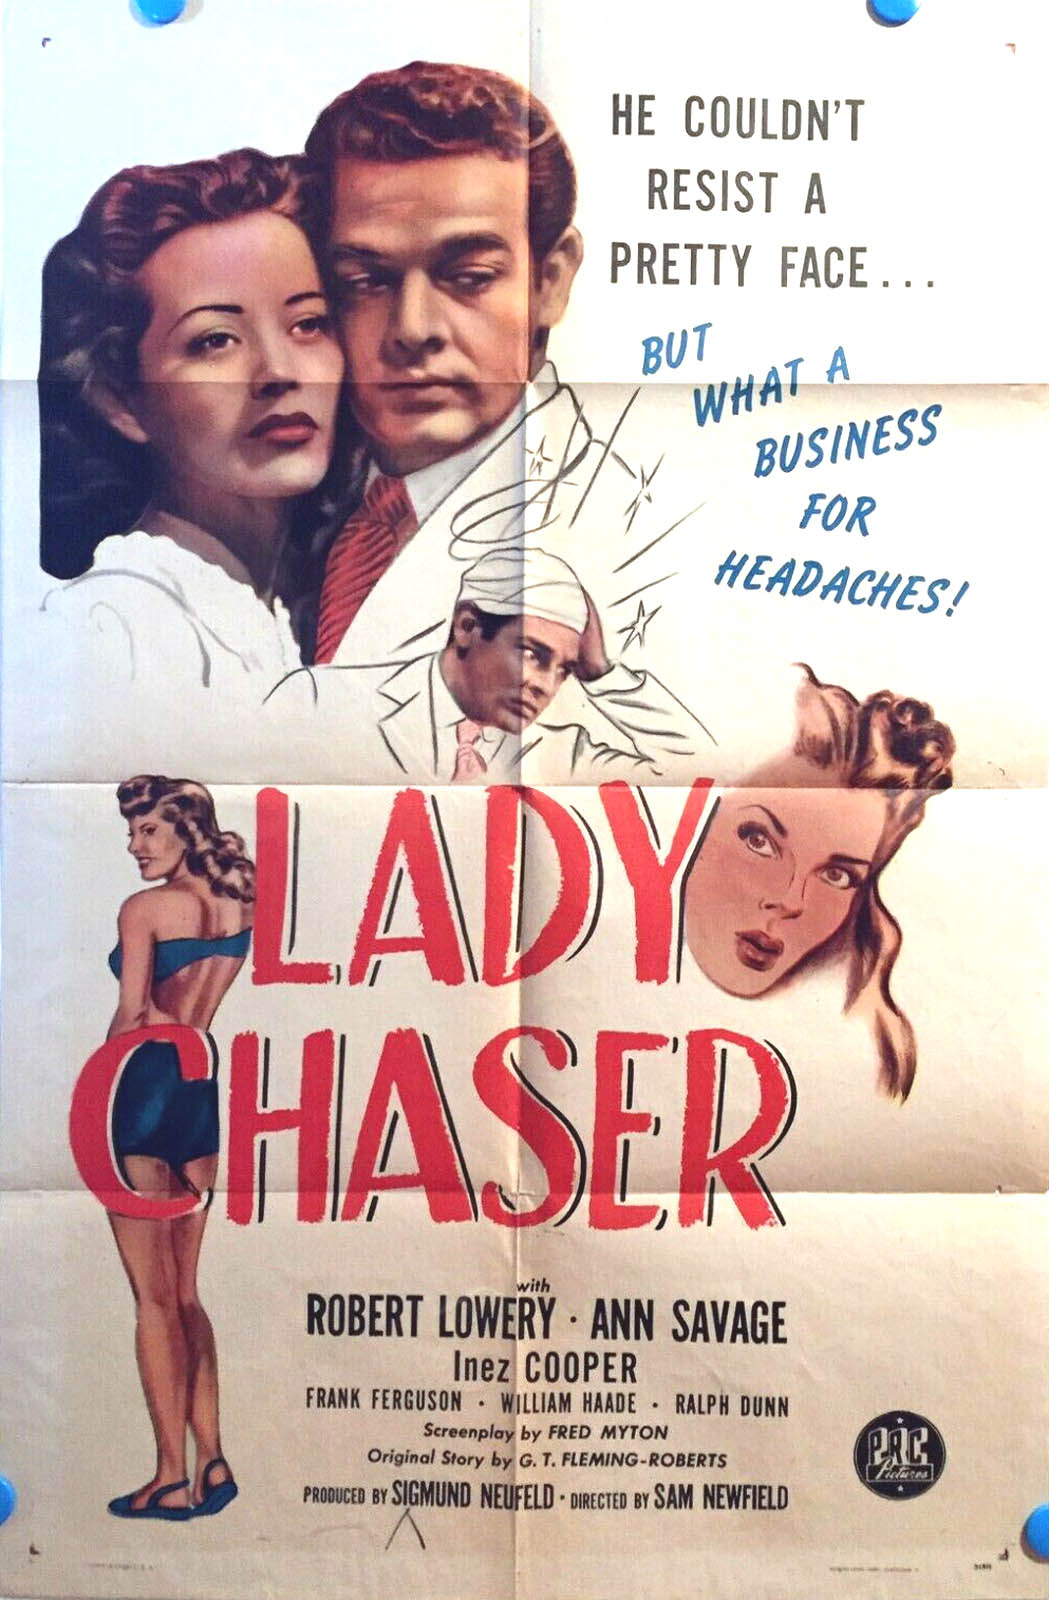 LADY CHASER